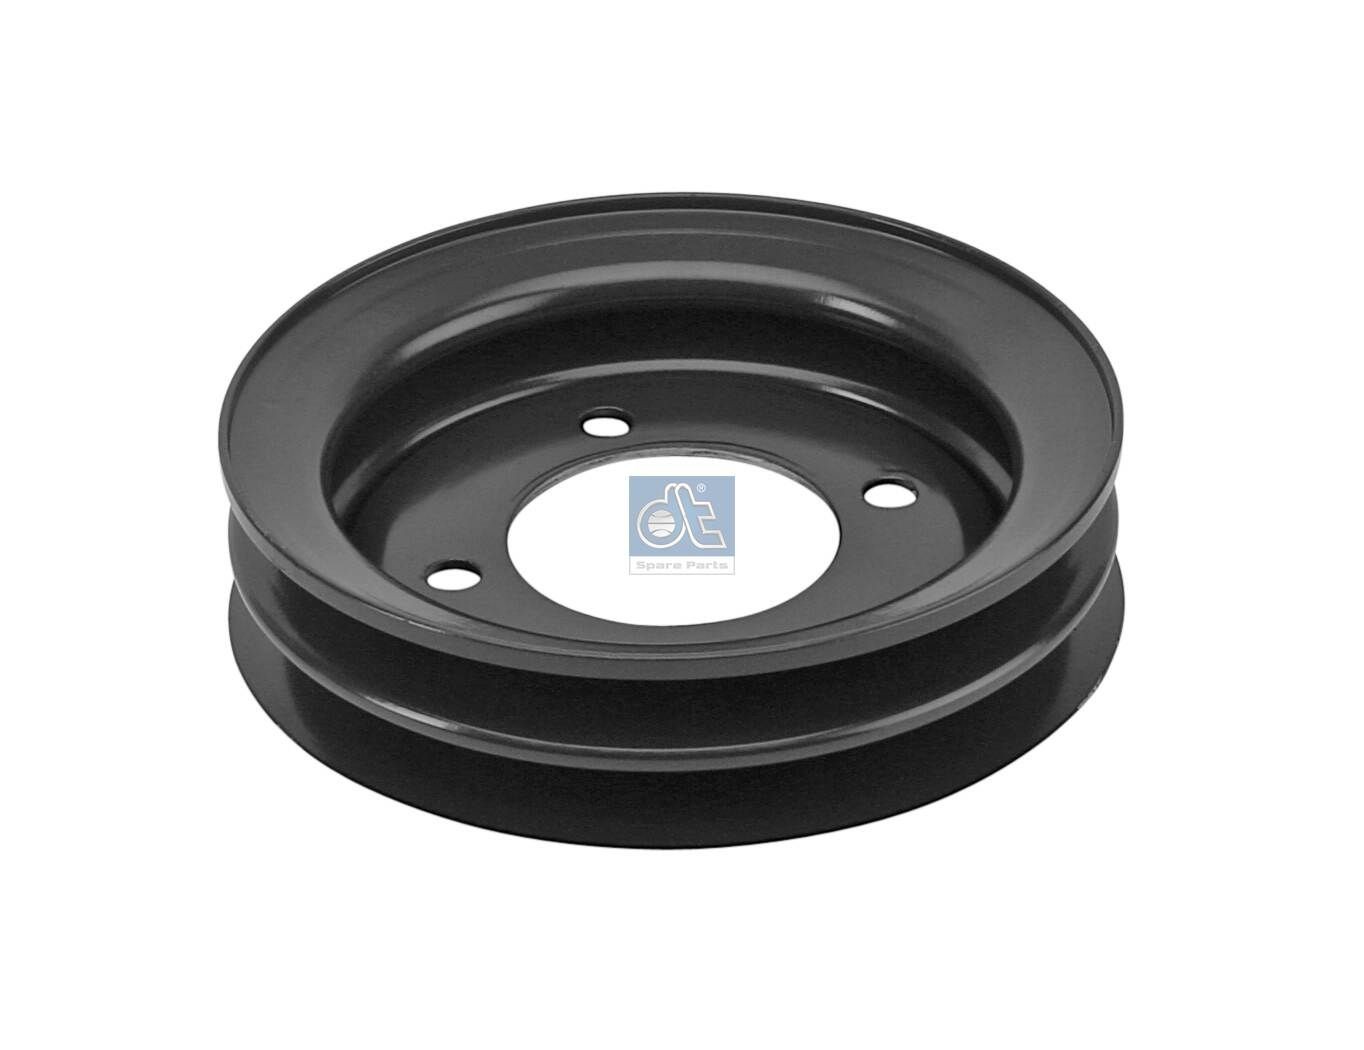 Opel Water pump pulley DT Spare Parts 1.11345 at a good price